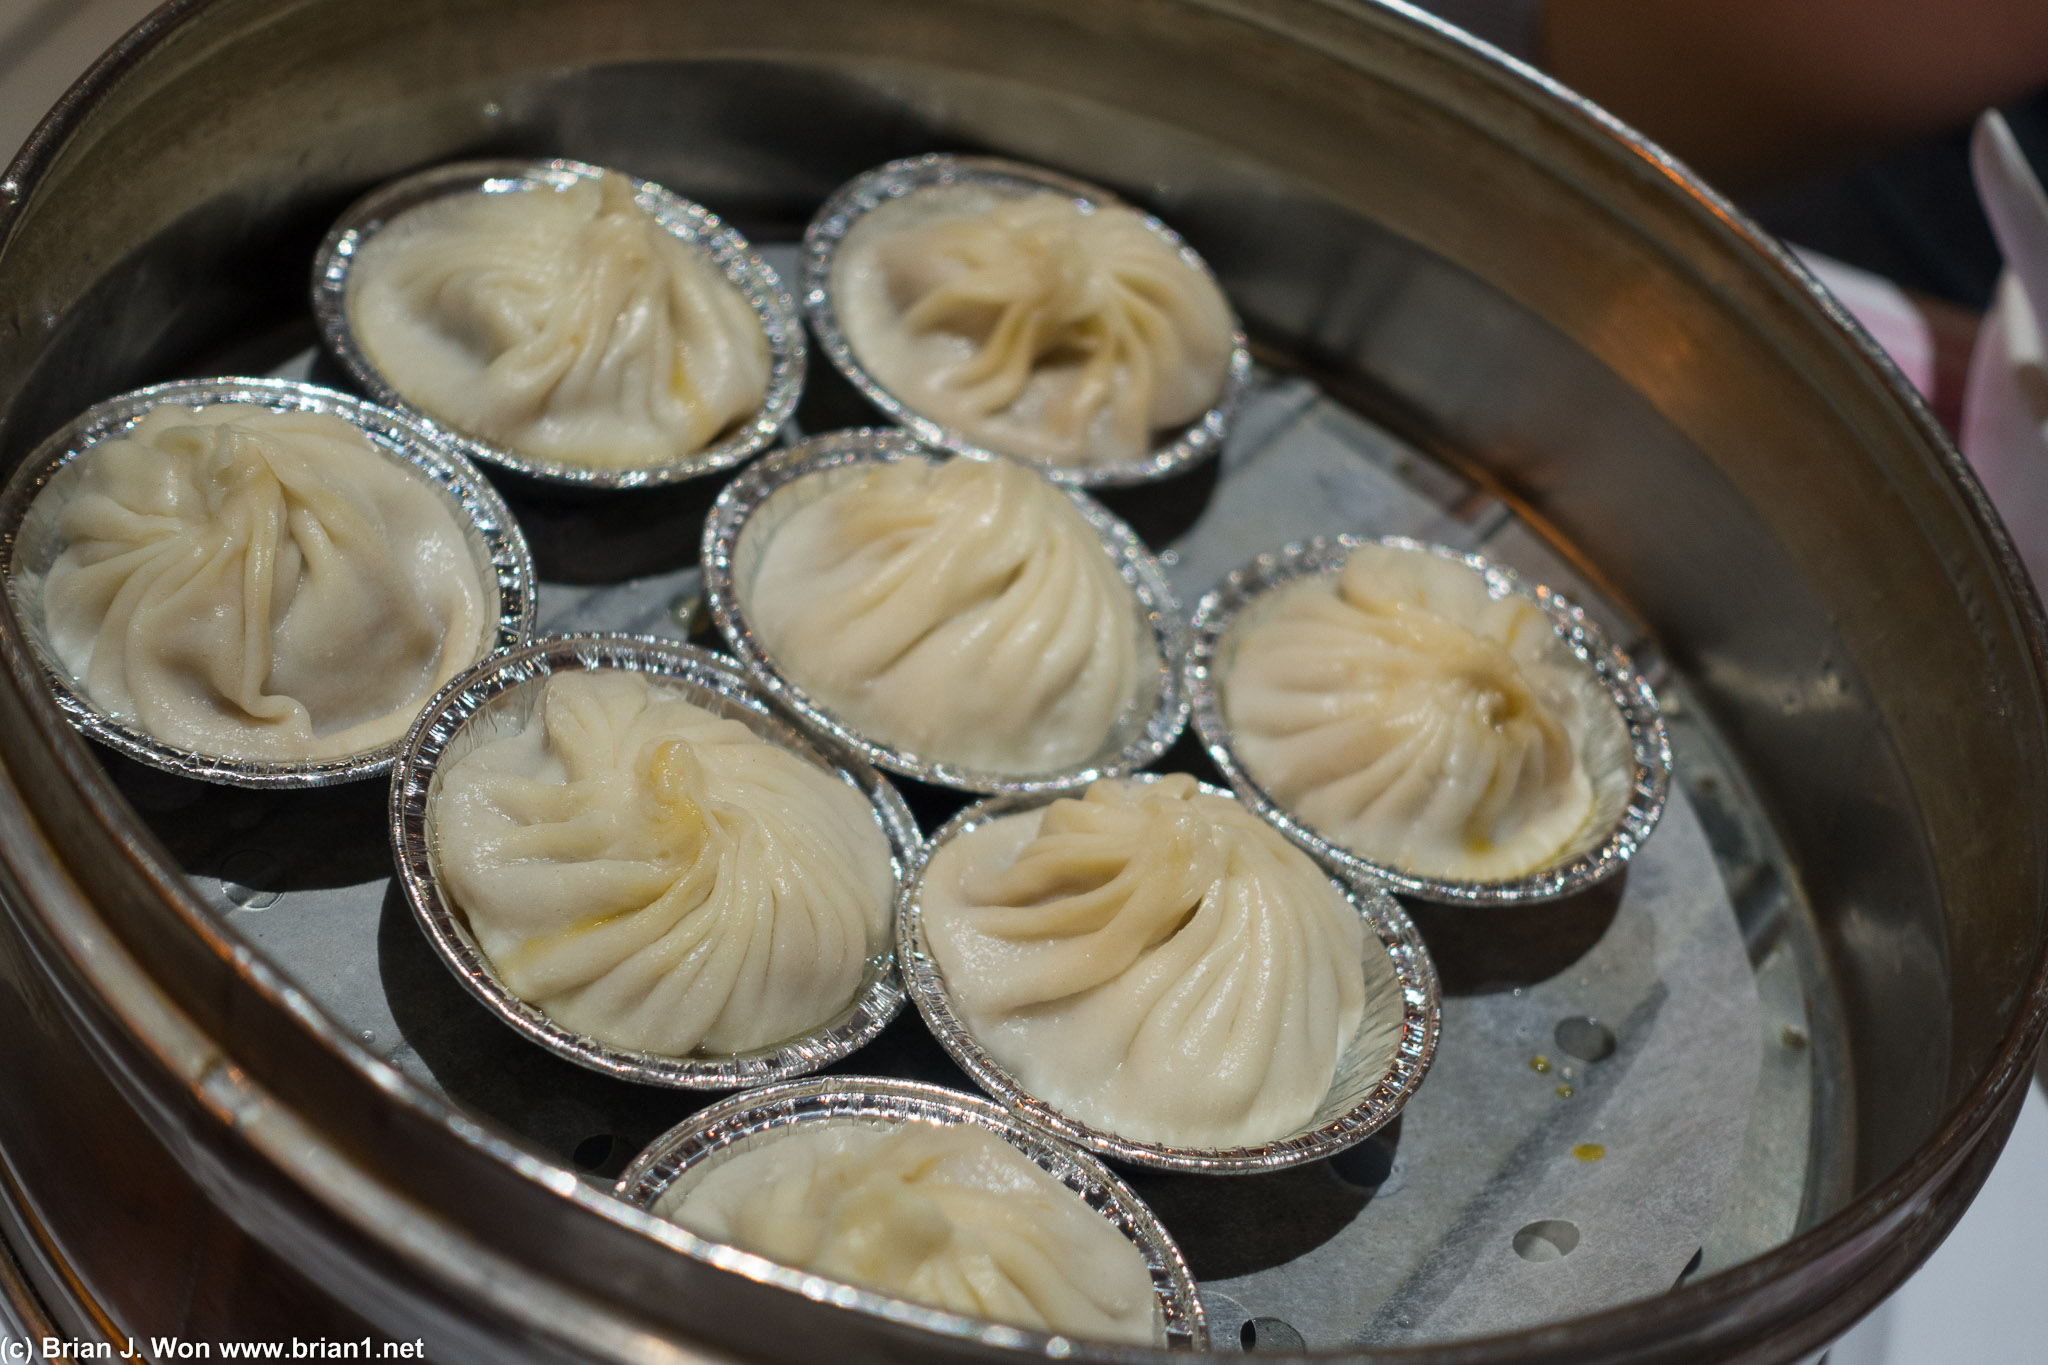 Ditto for the xiao long bao. These in particular looked over steamed.